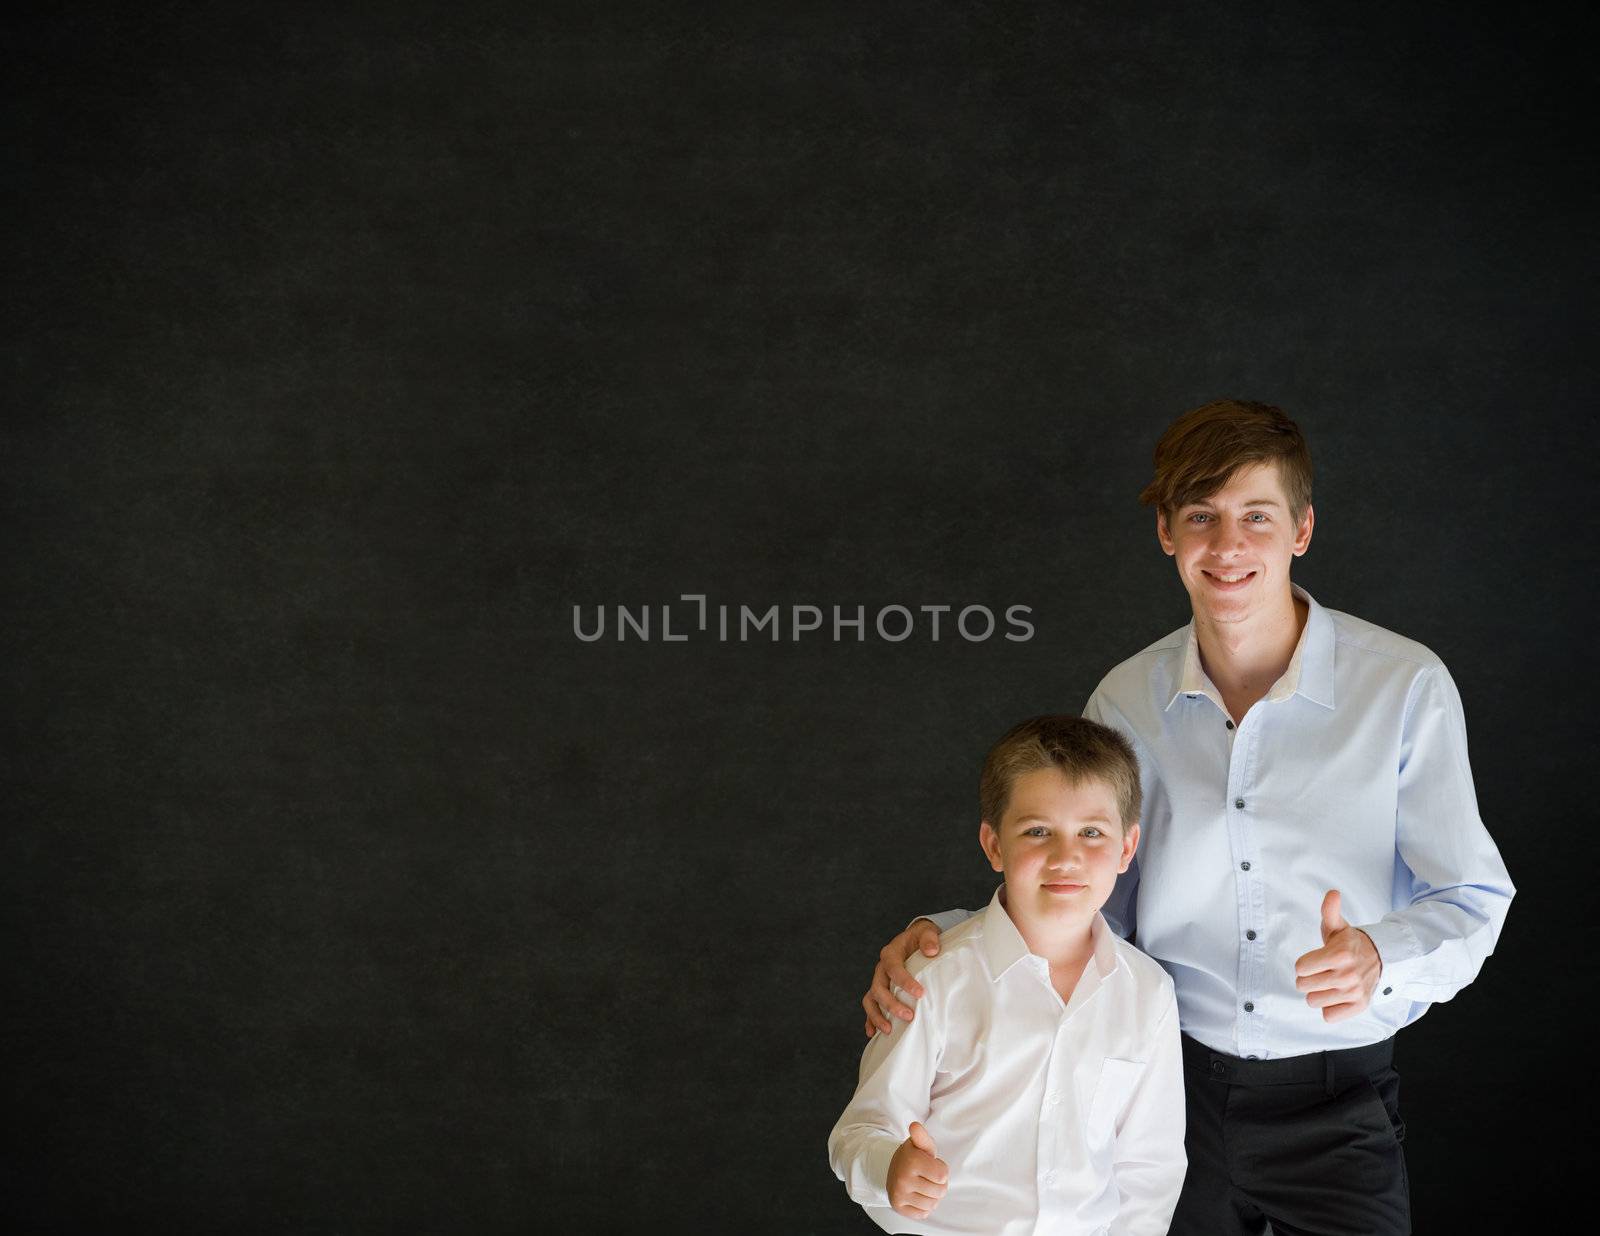 Teacher or student with boy dressed up as business man thumbs up on backboard background